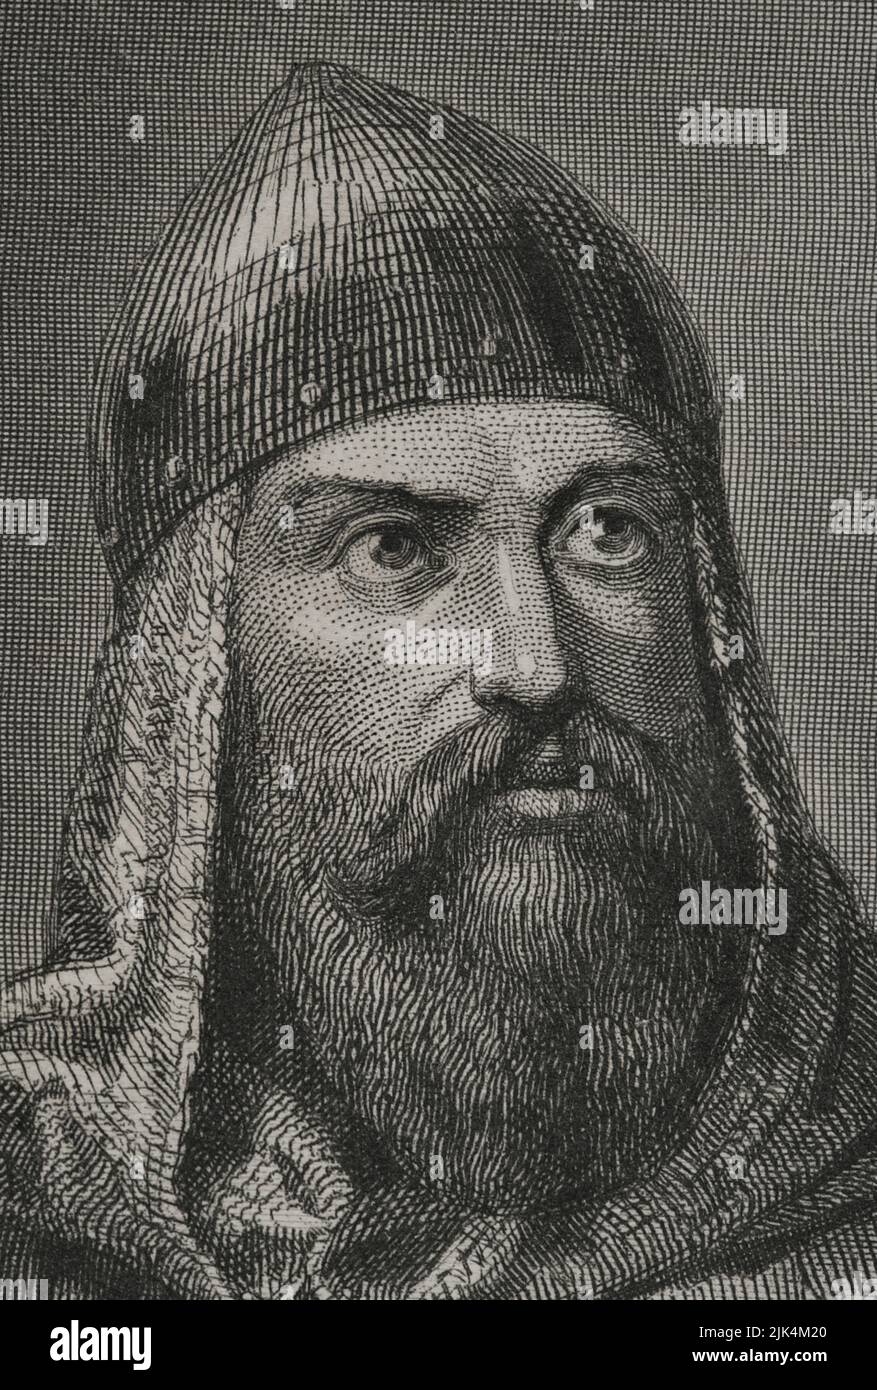 Rodrigo Díaz de Vivar, known as El Cid Campeador (ca. 1043-1099). Castilian nobleman, knighted by the infante Sancho. He took part in the battles of Llantada and Golpejera against Alfonso VI, and the Siege of Zamora. Portrait. Engraving by Geoffroy. Detail. 'Historia Universal', by César Cantú. Volume III, 1855. Stock Photo